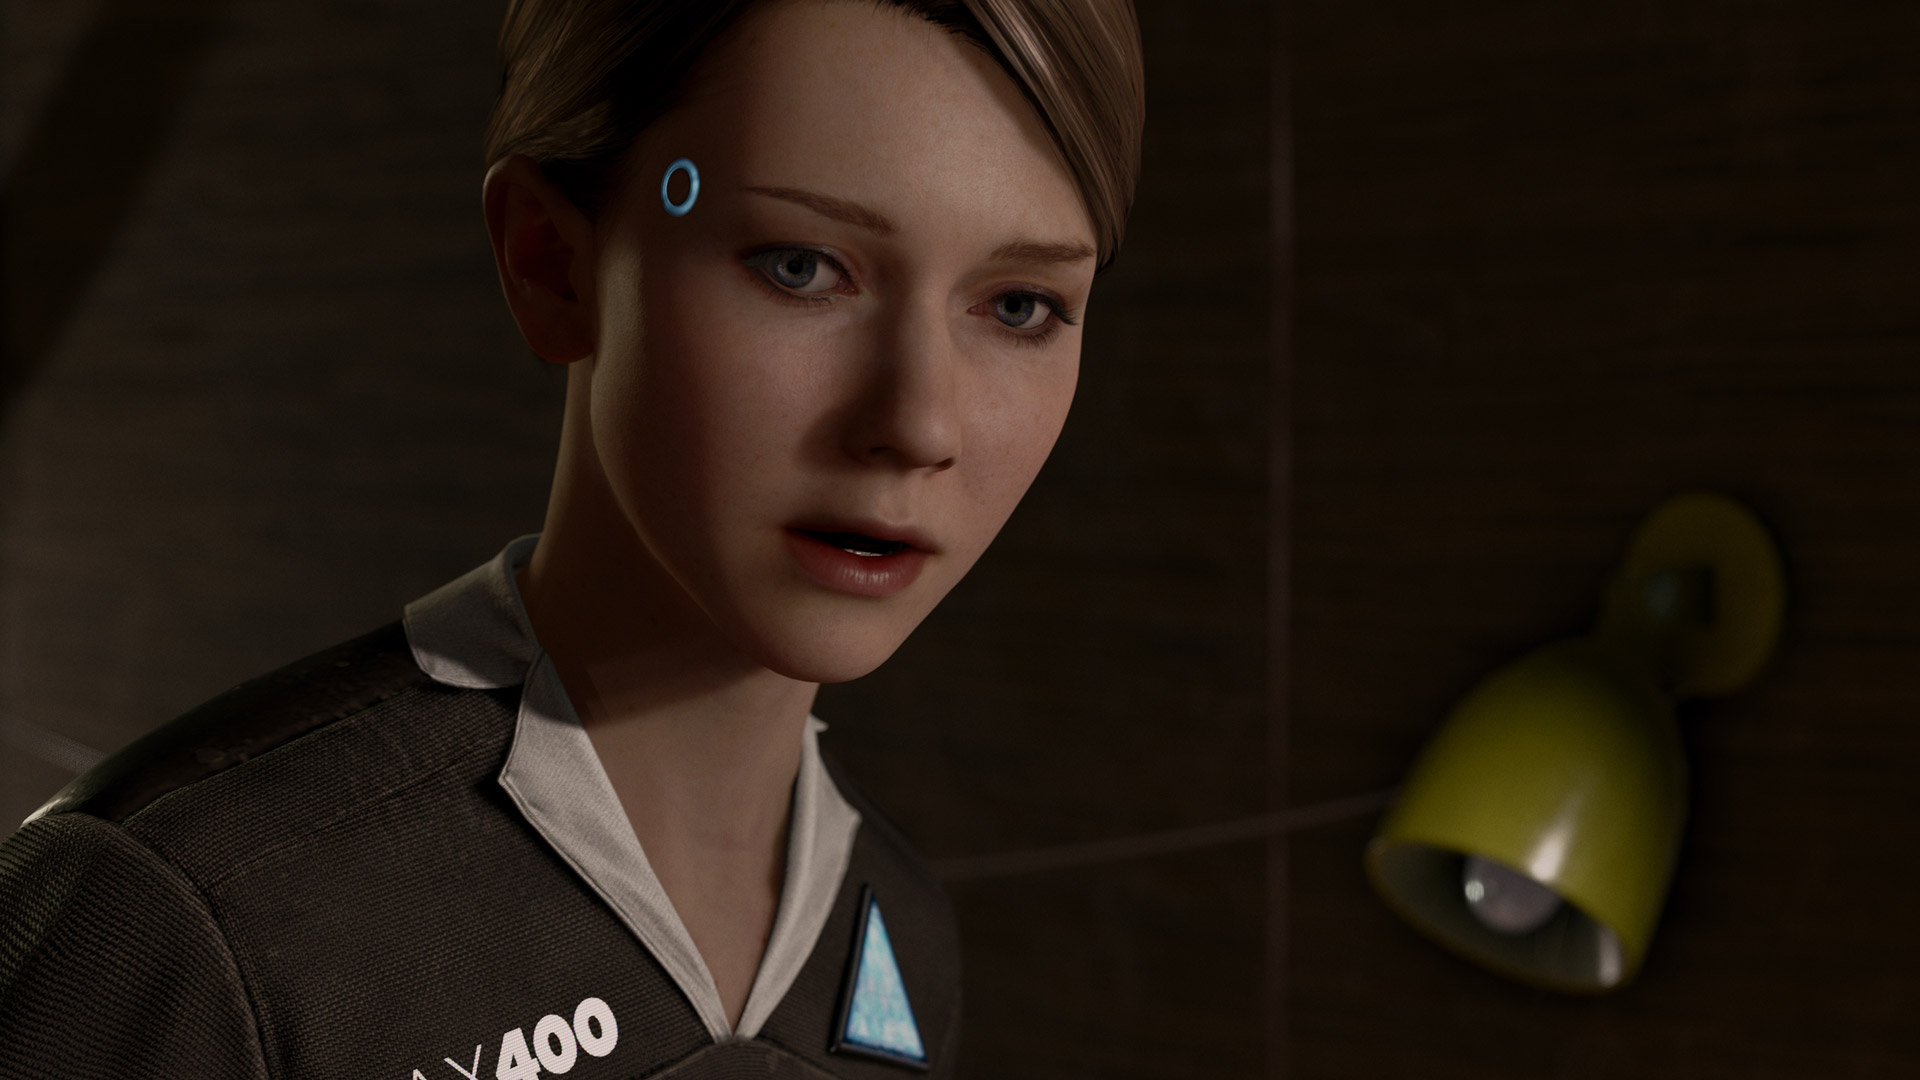 Detroit: Become Human director wants players to confront the game's  violence - The Verge